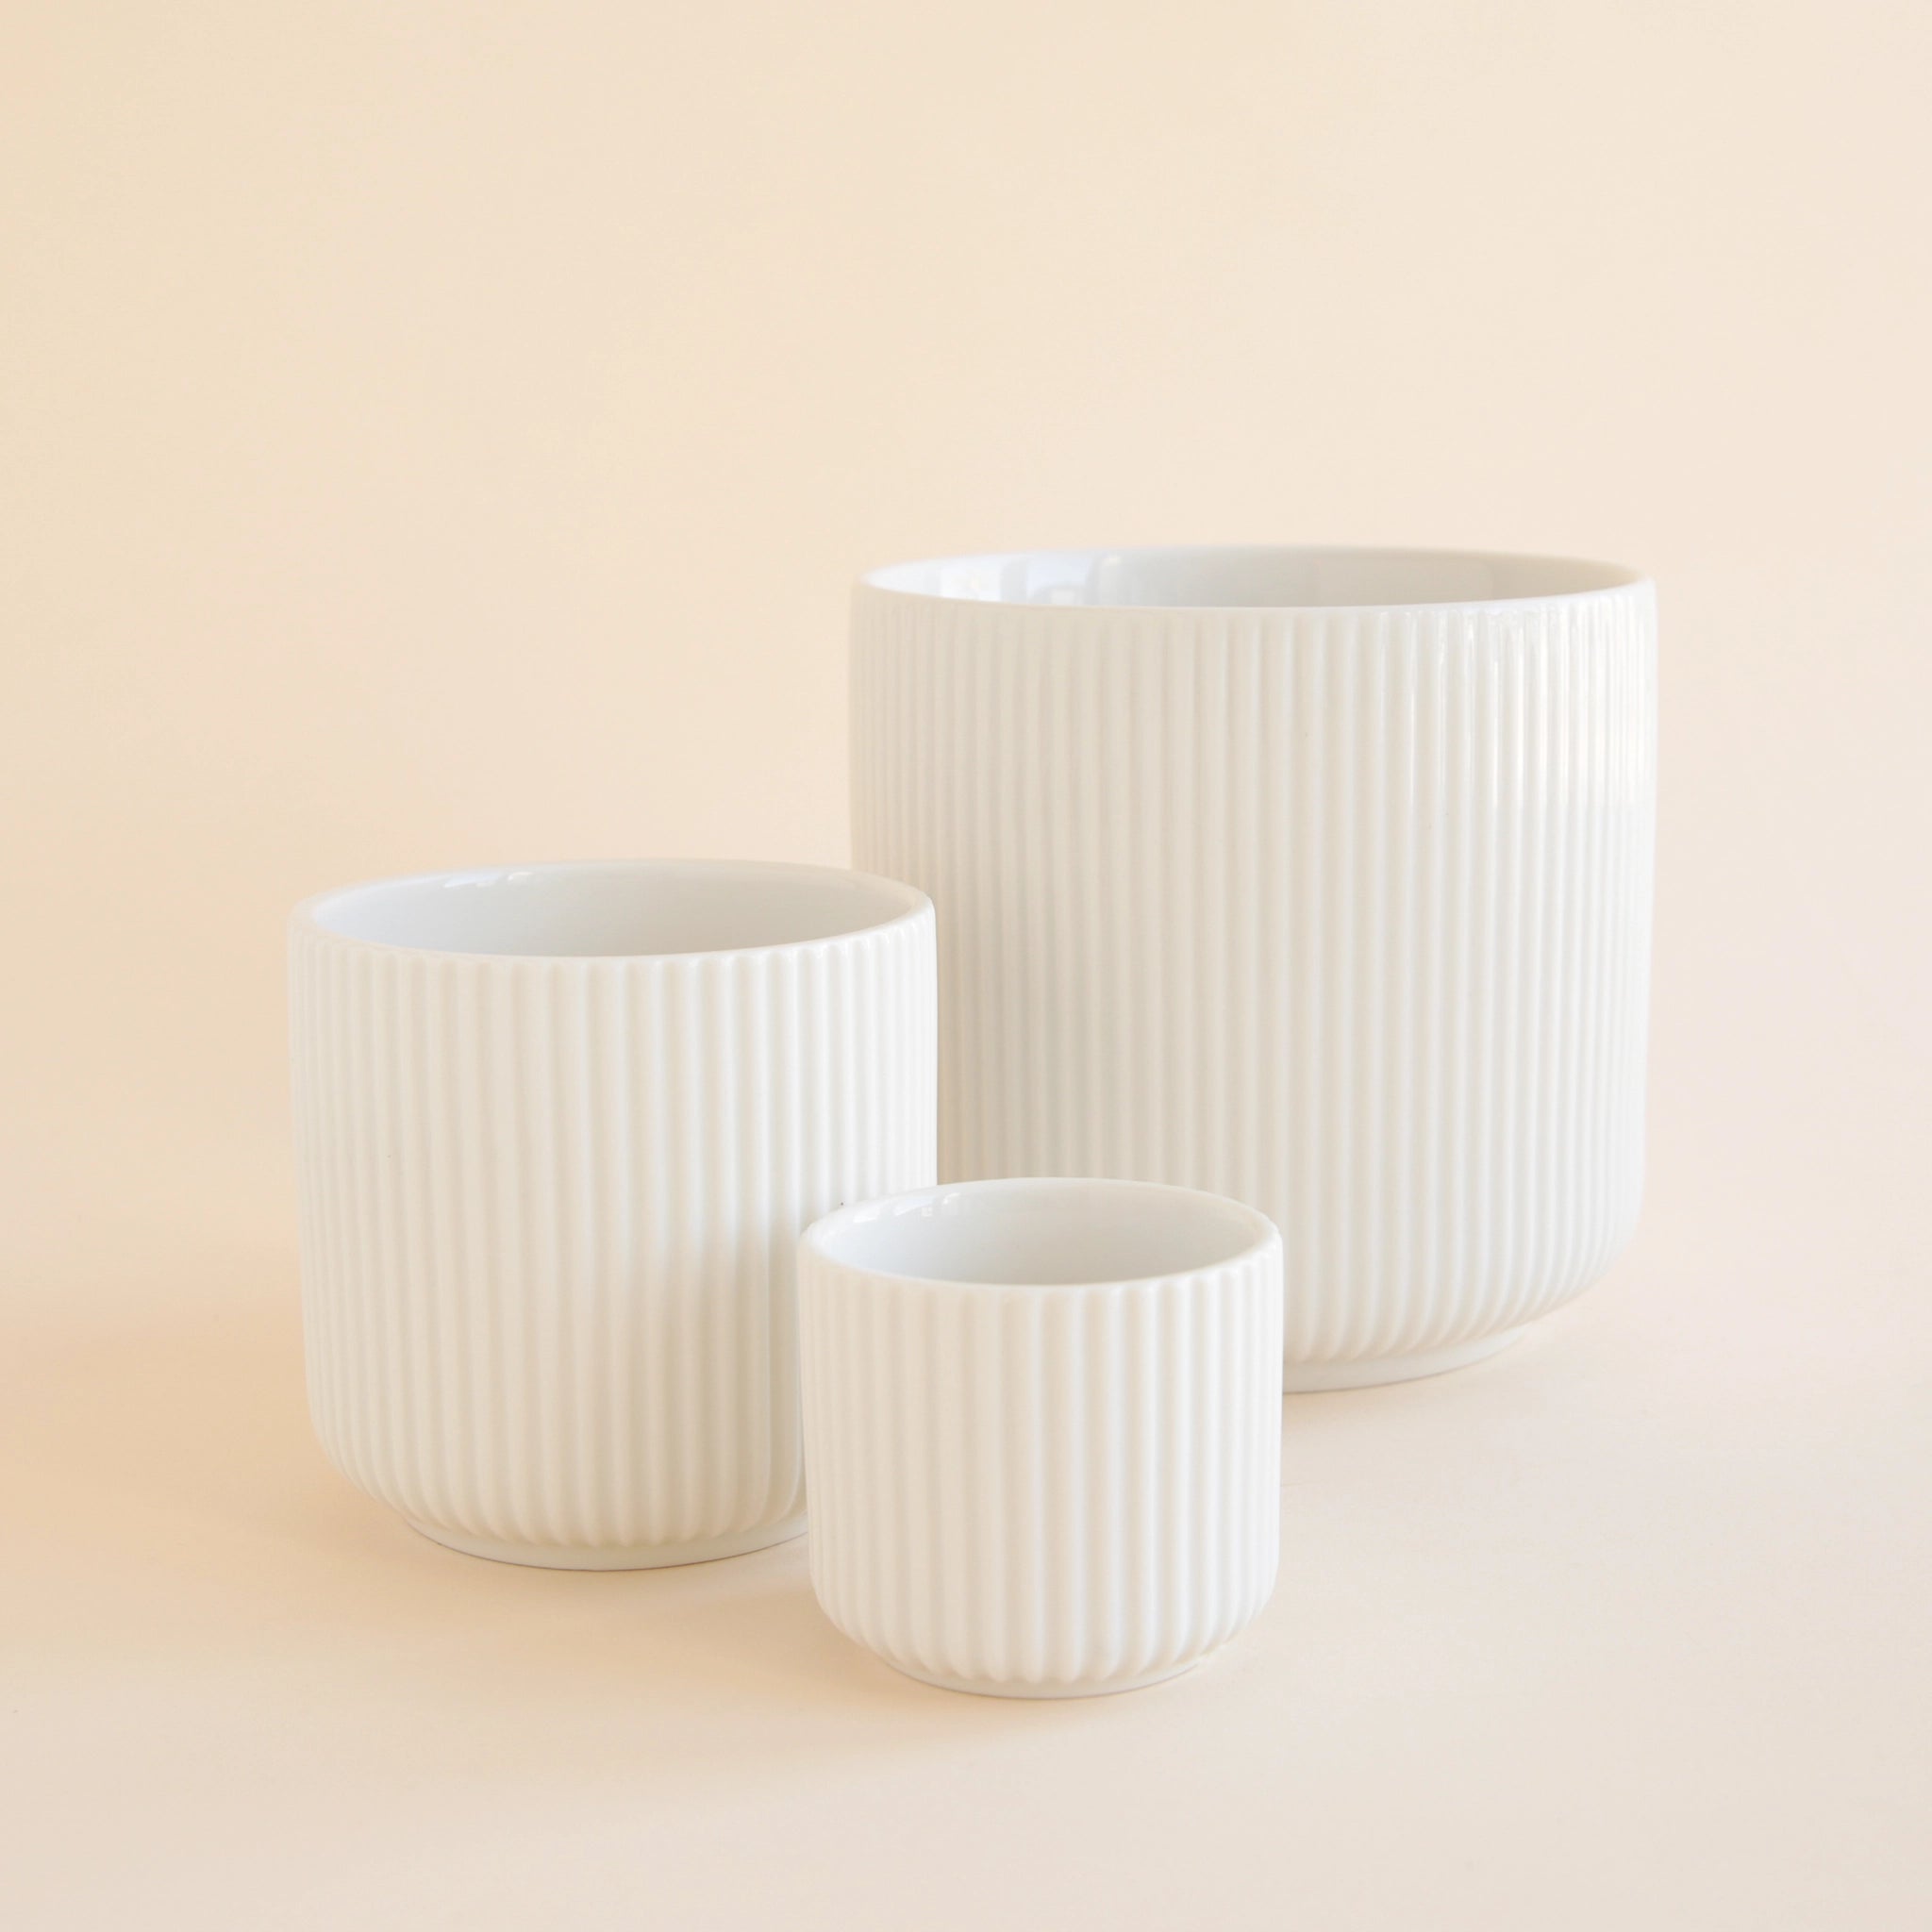 On an ivory background is three different sized white ceramic planters with a fluting detailing and a rounded bottom.